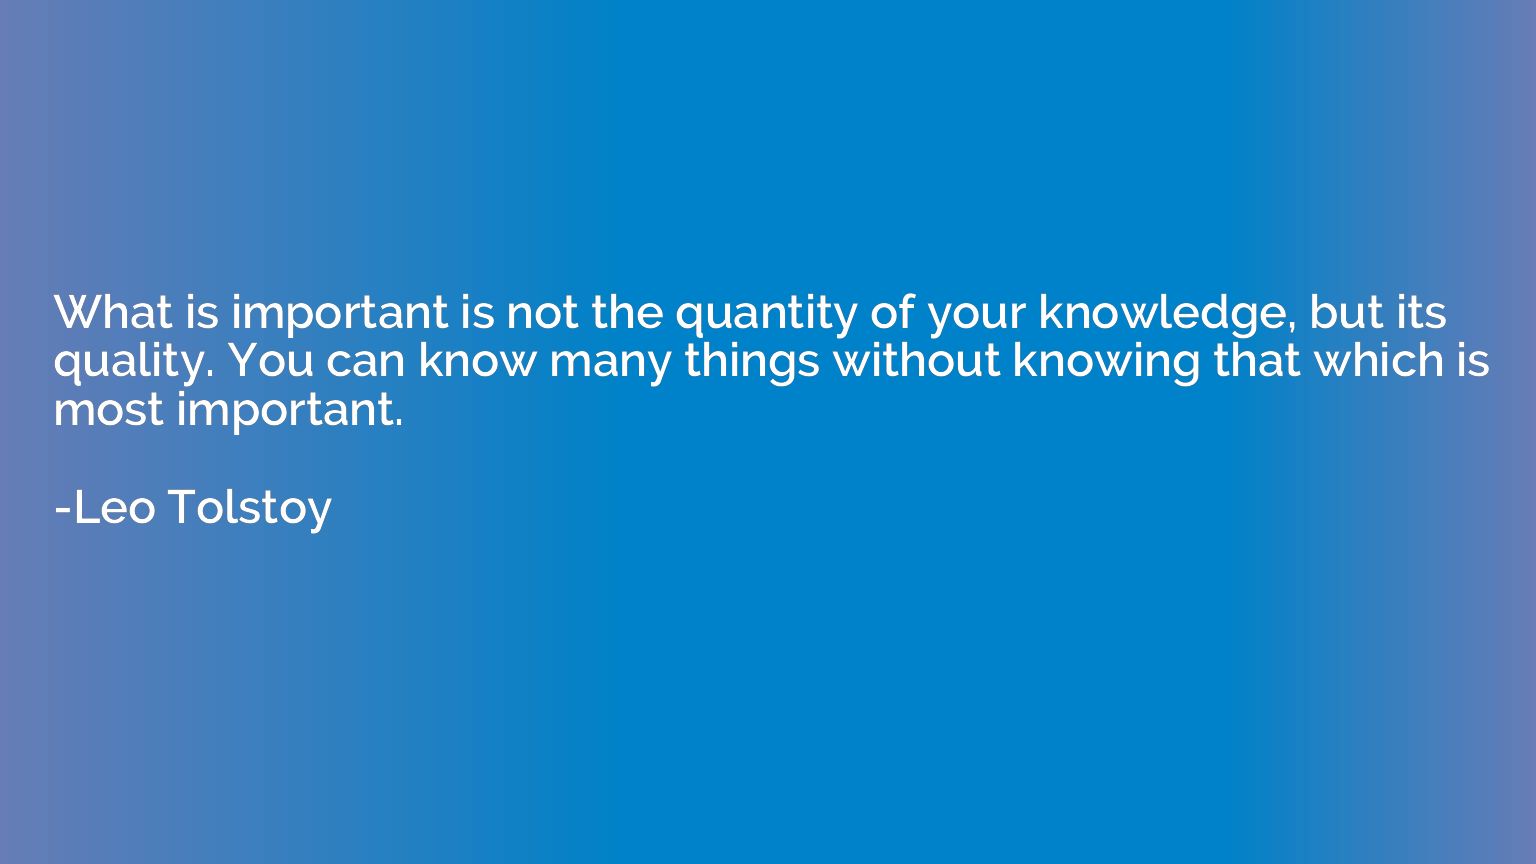 What is important is not the quantity of your knowledge, but